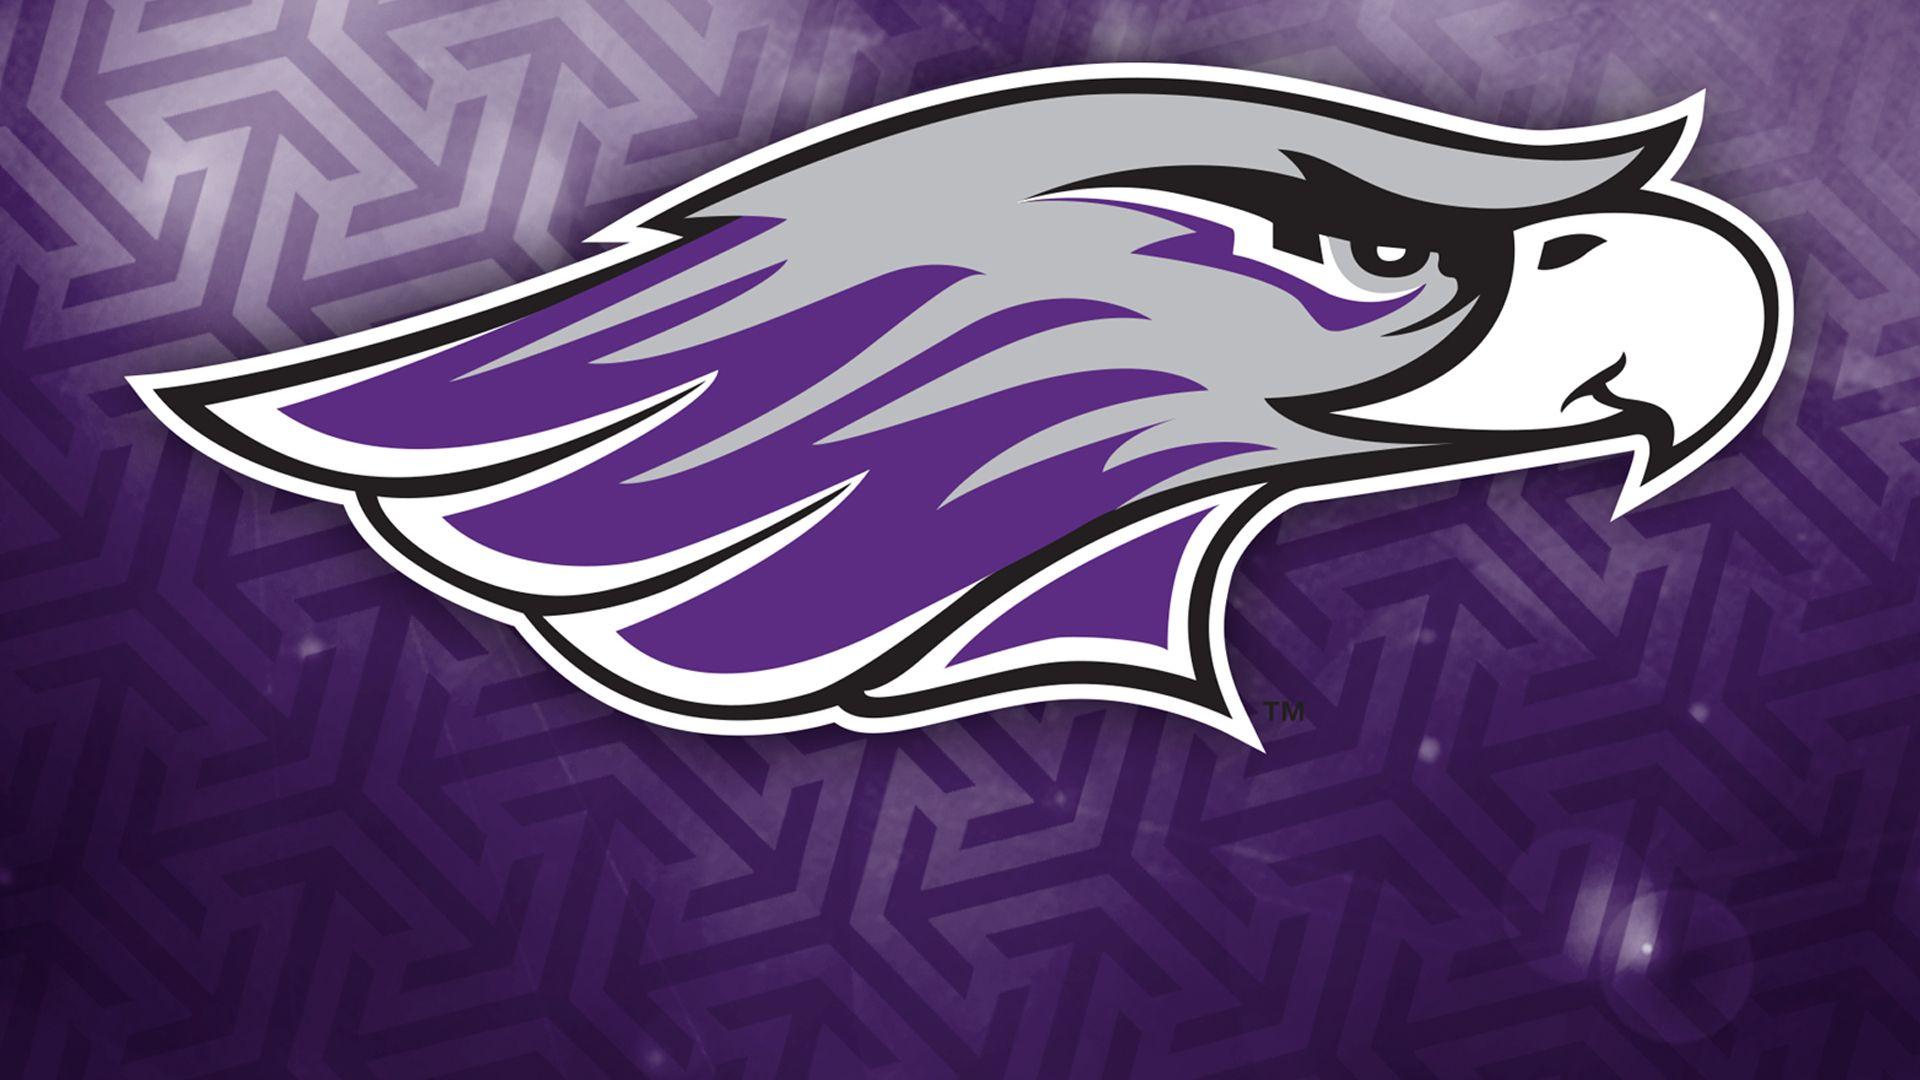 Whitewater Logo - UW Whitewater Announces 2019 Hall Of Fame Class